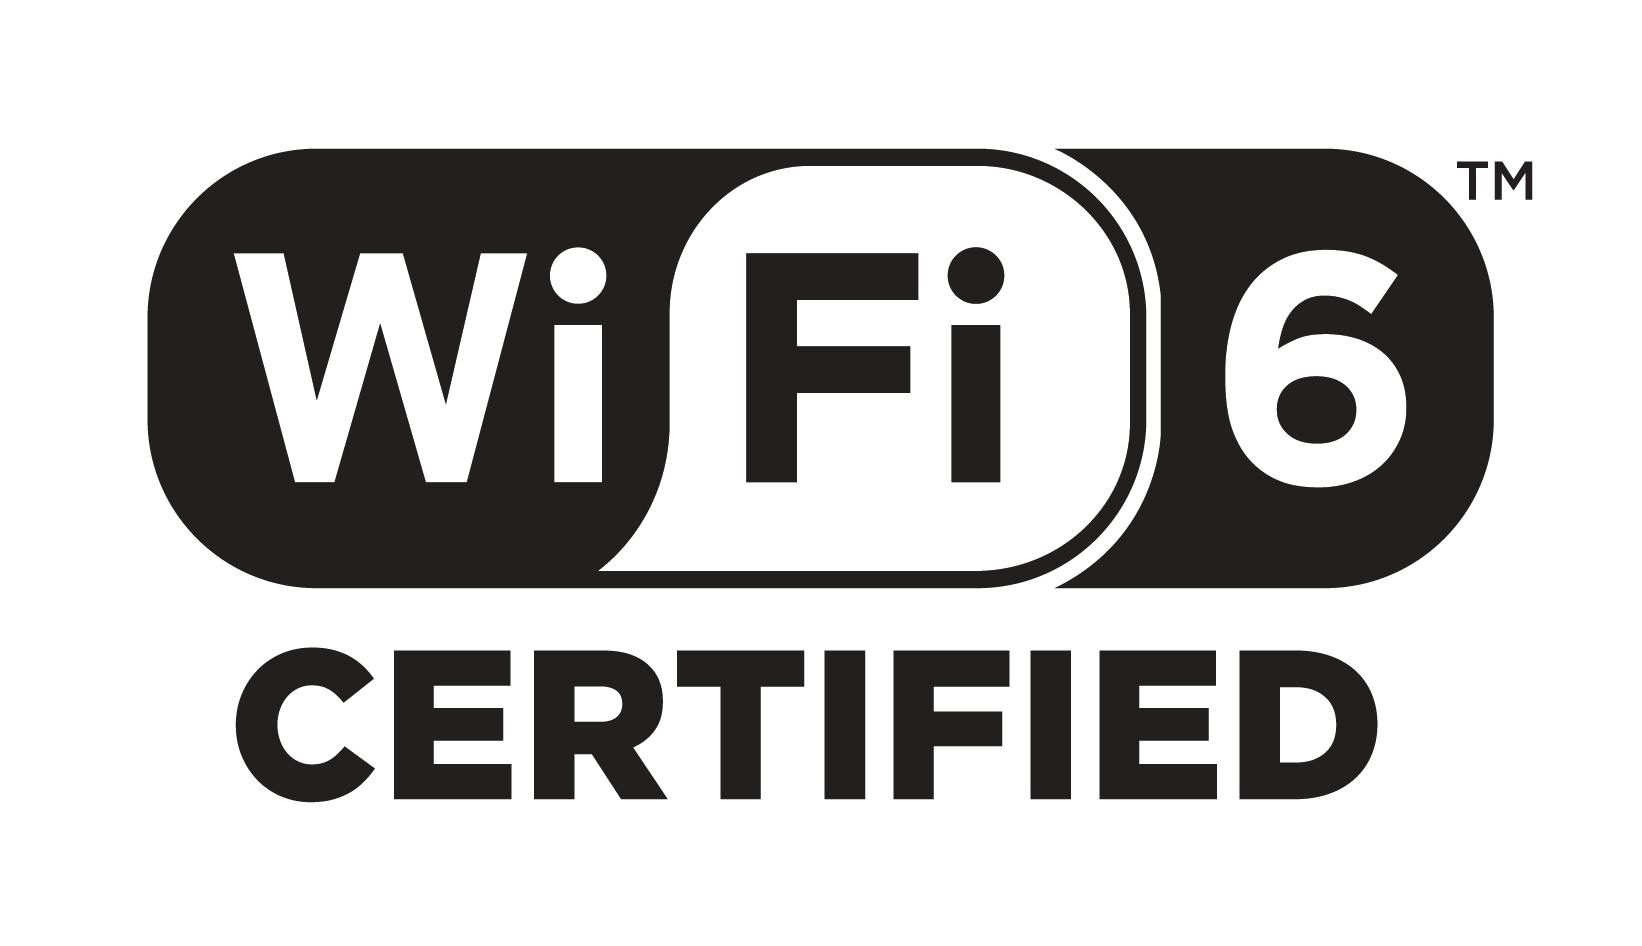 Google Fi brings spam warnings and Wi-Fi calling to more phones Wi-Fi_CERTIFIED_6%E2%84%A2_high-res.png